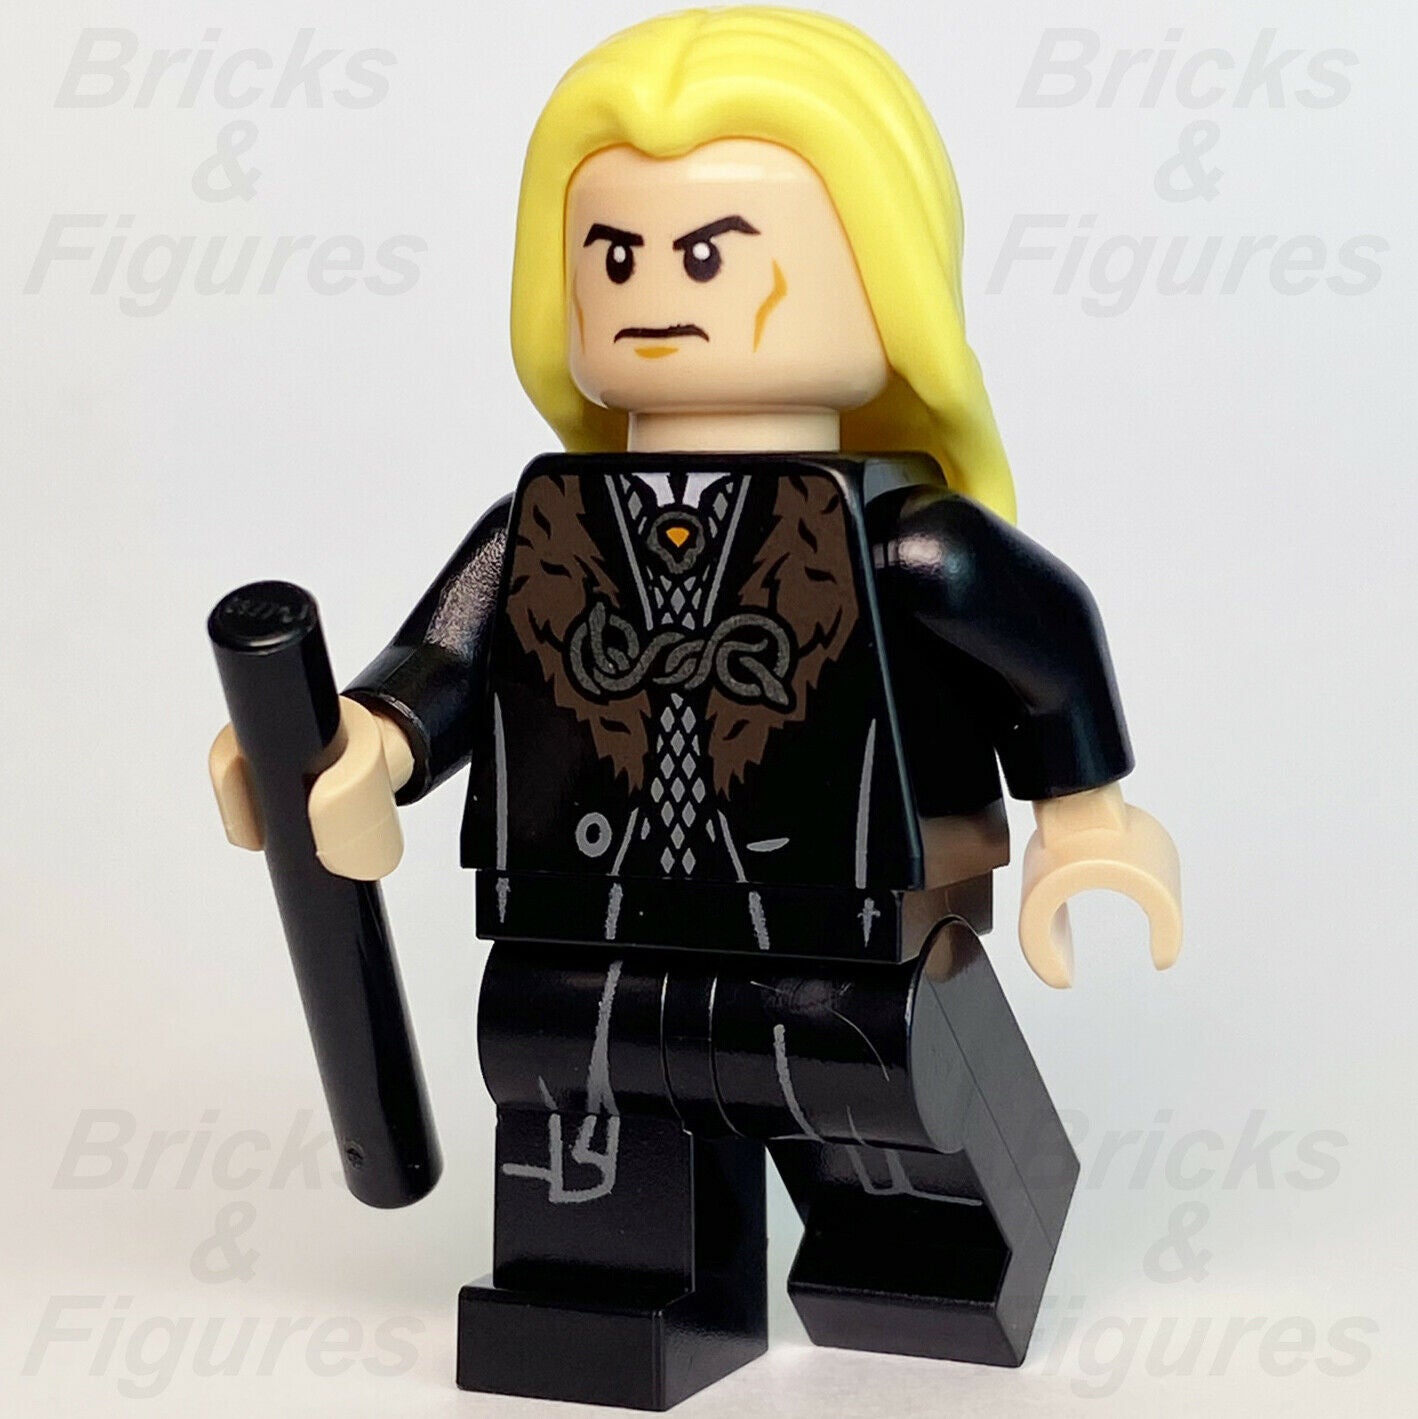 New Harry Potter LEGO Lucius Malfoy Death Eater Wizard Minifigure 75978 hp255 - Bricks & Figures